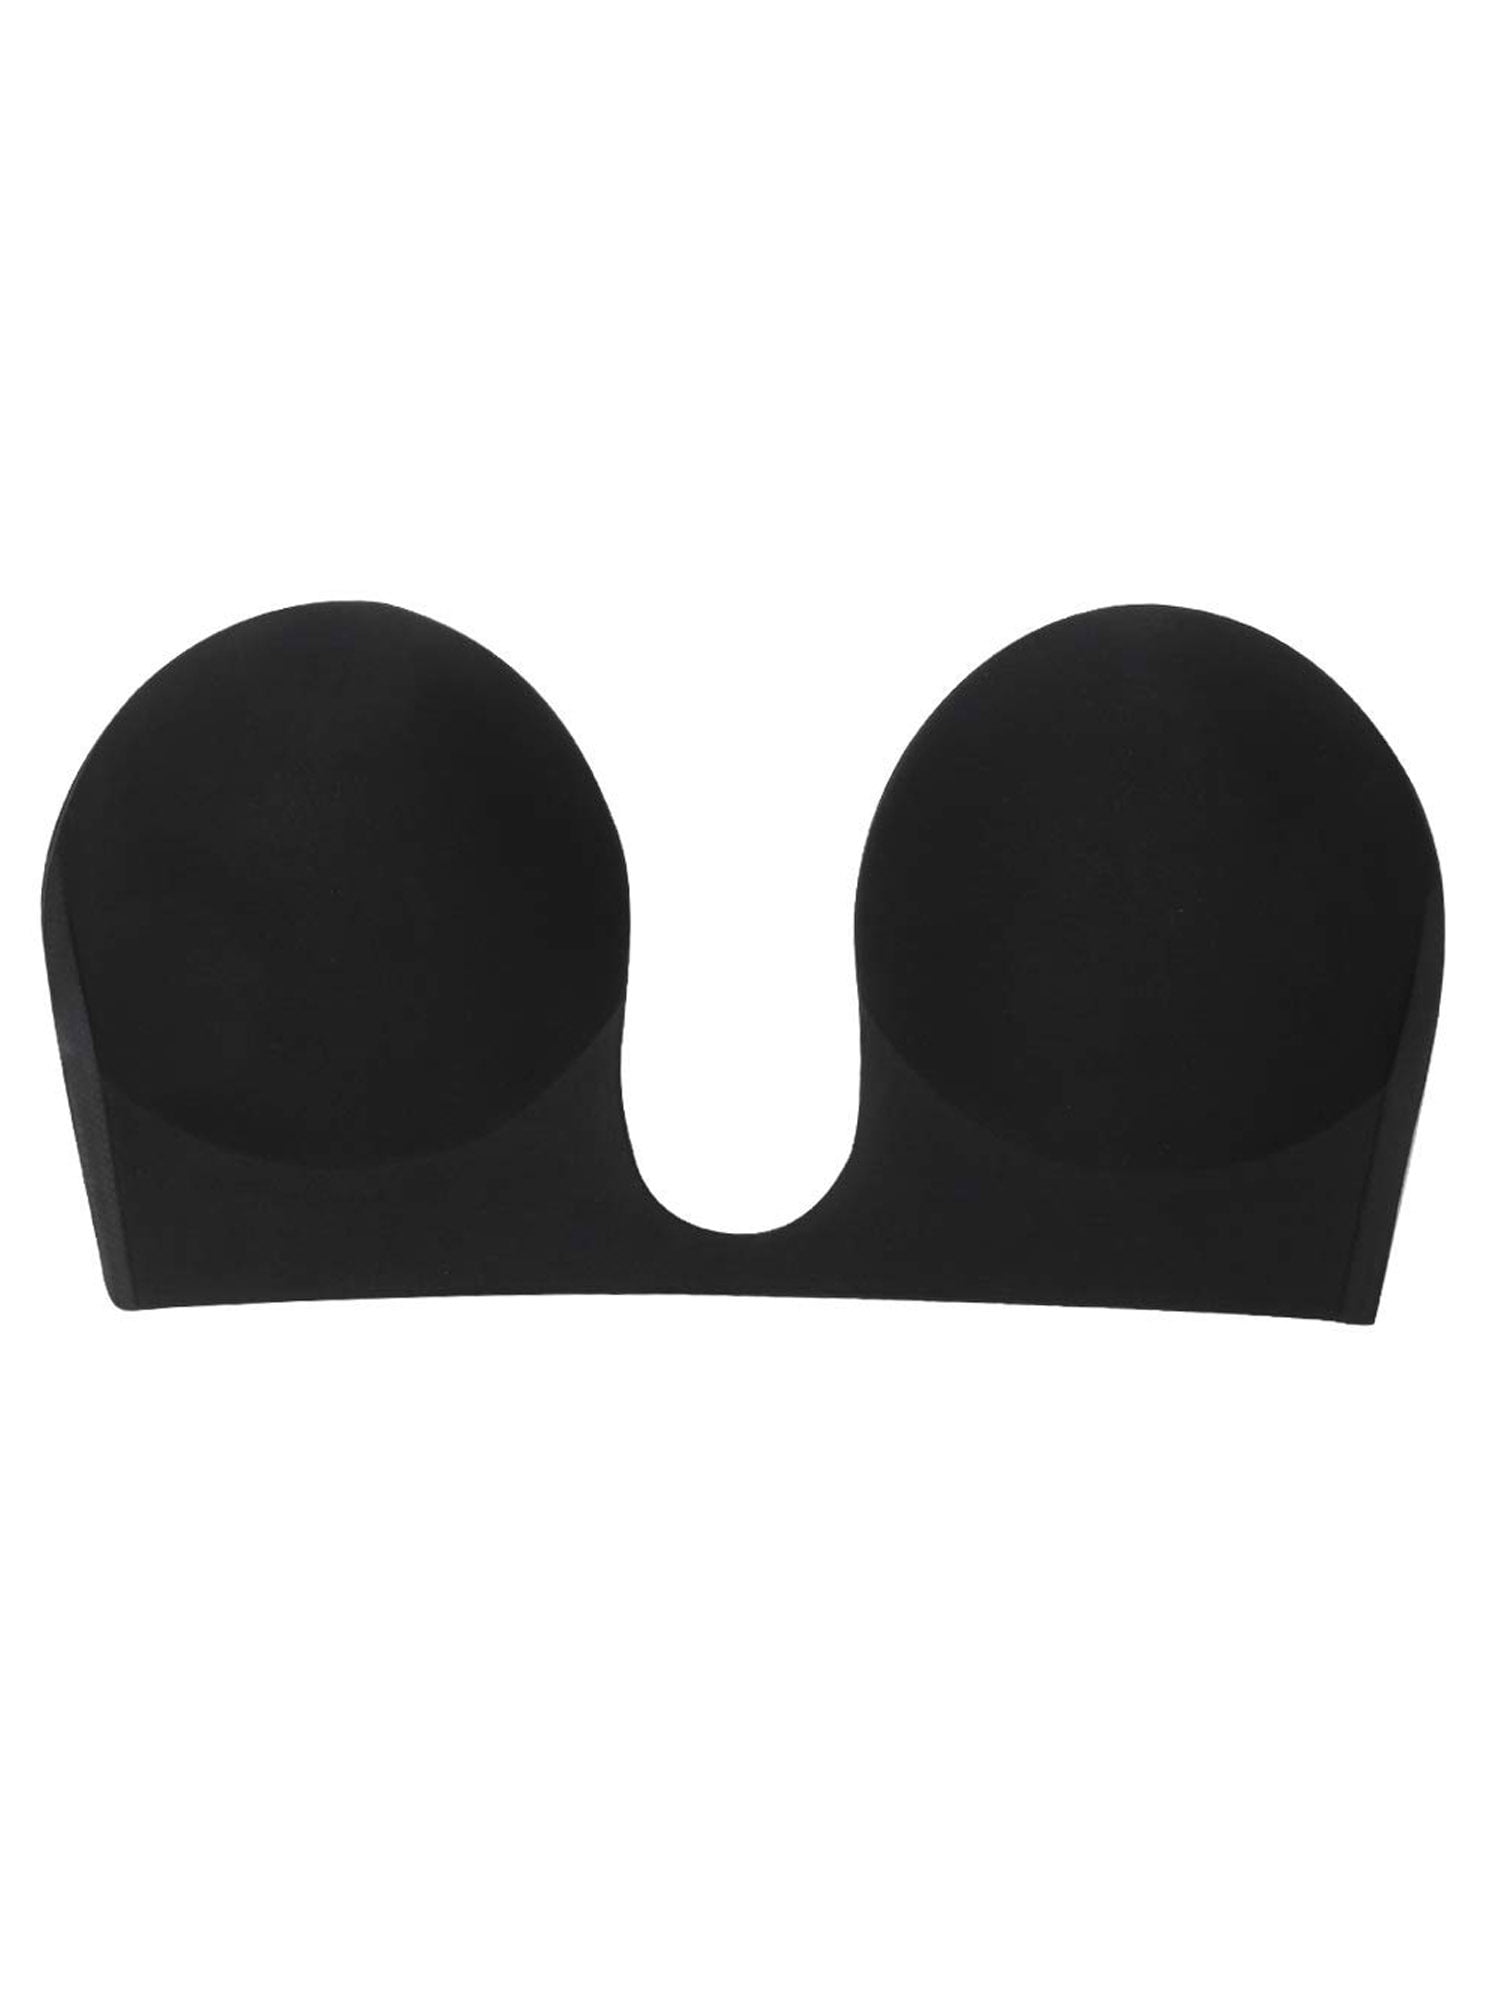 unetme Sticky Bra + Nipple Covers + Boob Tapes + Gift Box size Black B (34A)